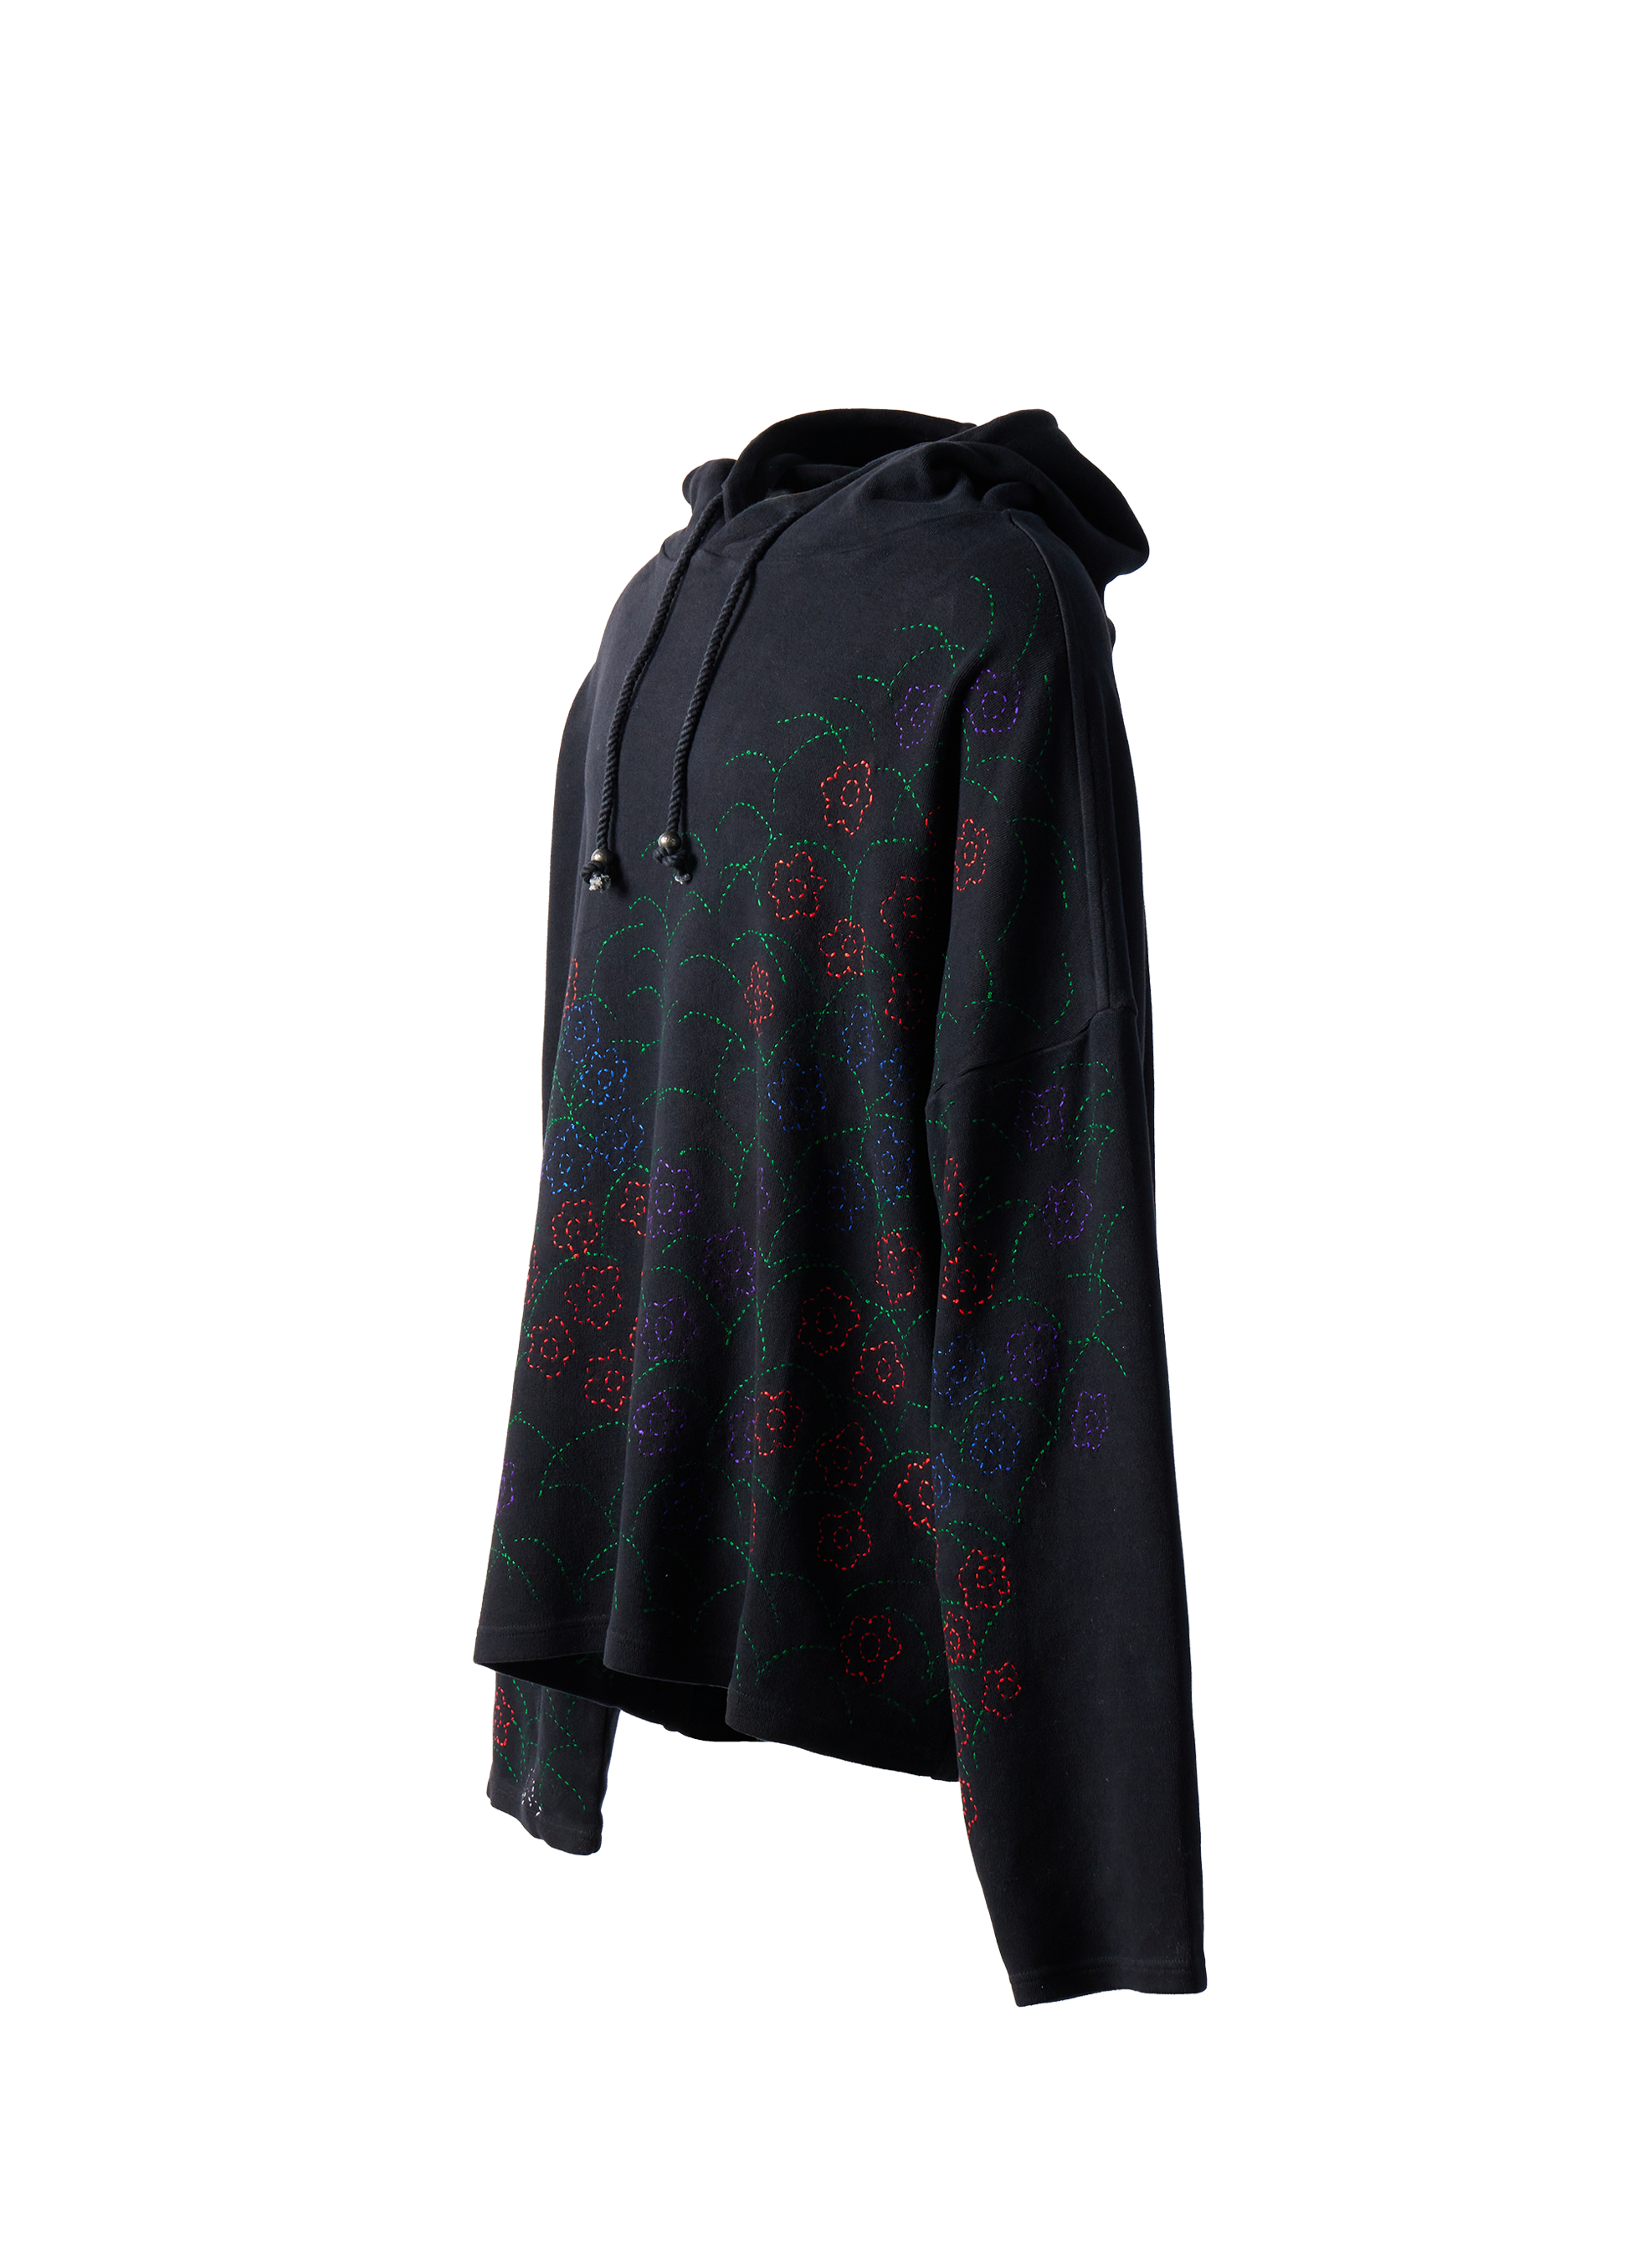 GLASS CYPRESS - Black Floral Hoodie product image